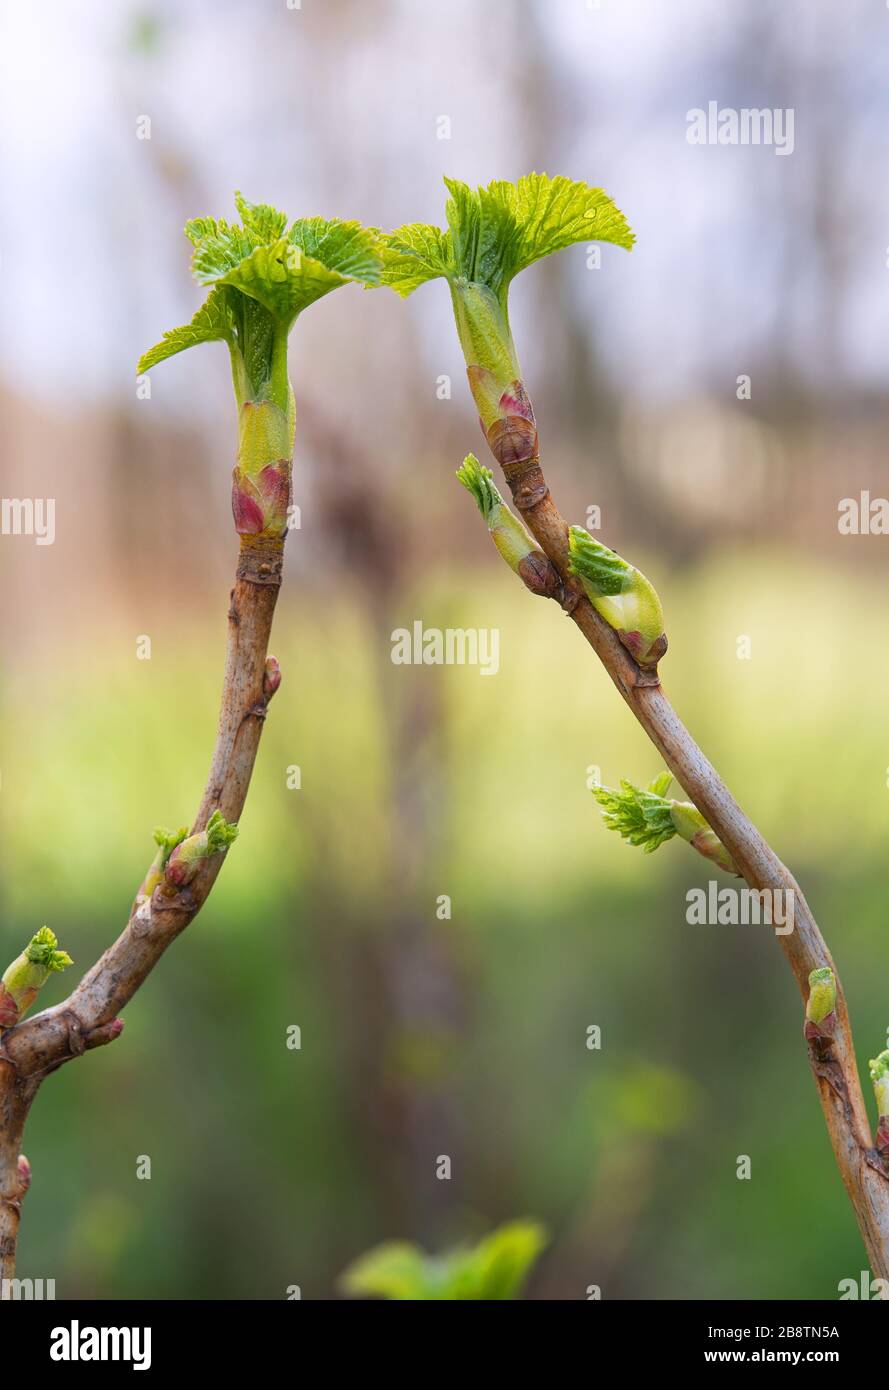 A branches of currant, close-up. Currant in the foreground in focus. The background is blurred. Stock Photo